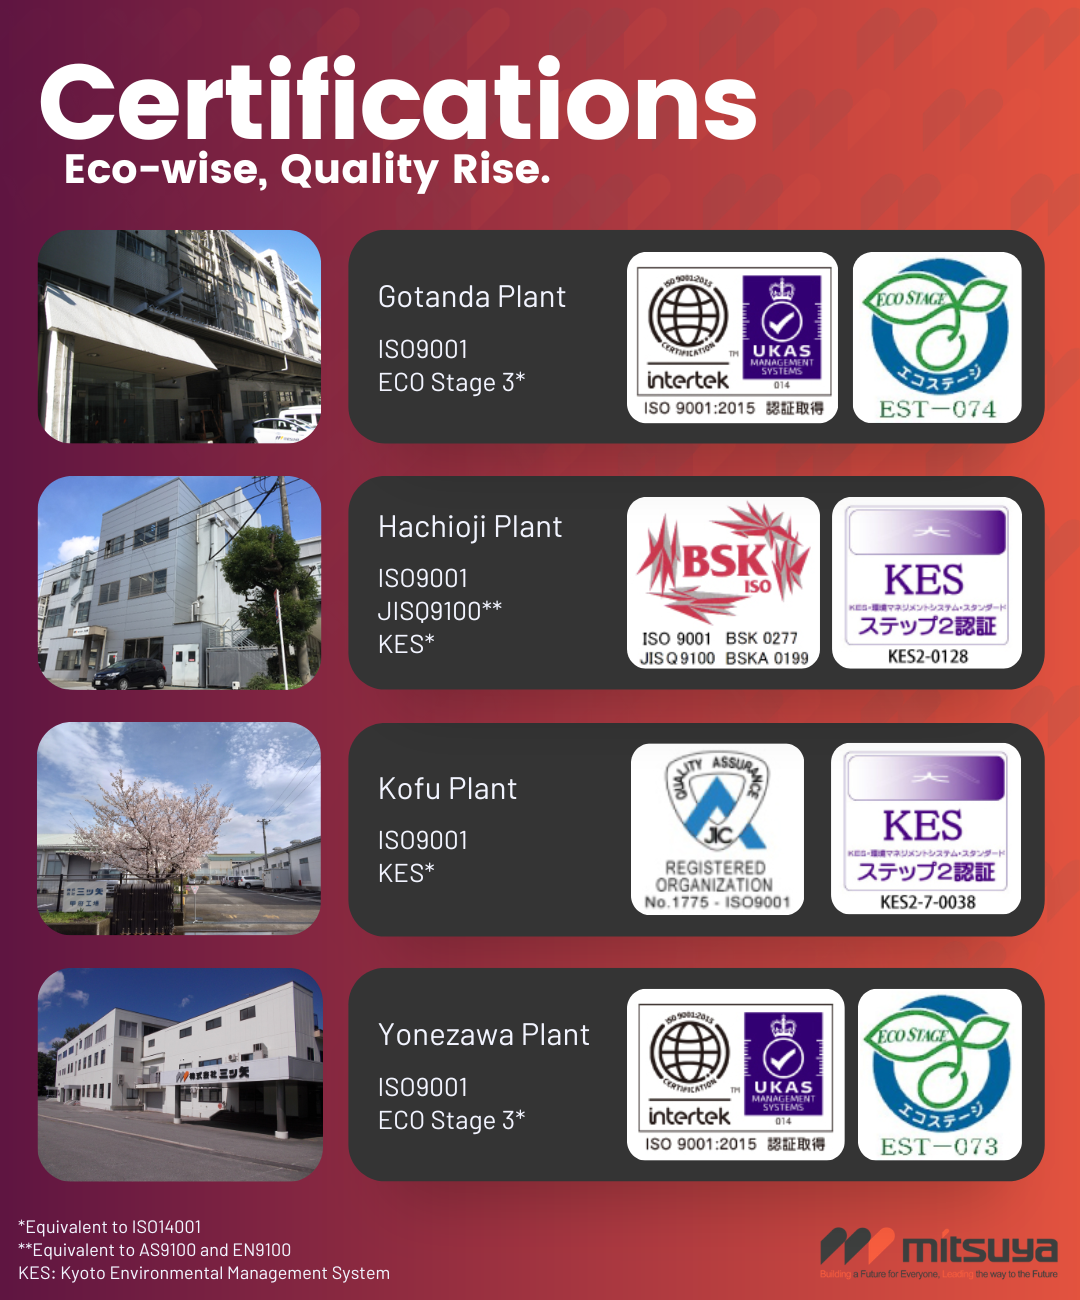 Introduction to Mitsuya's Certifications